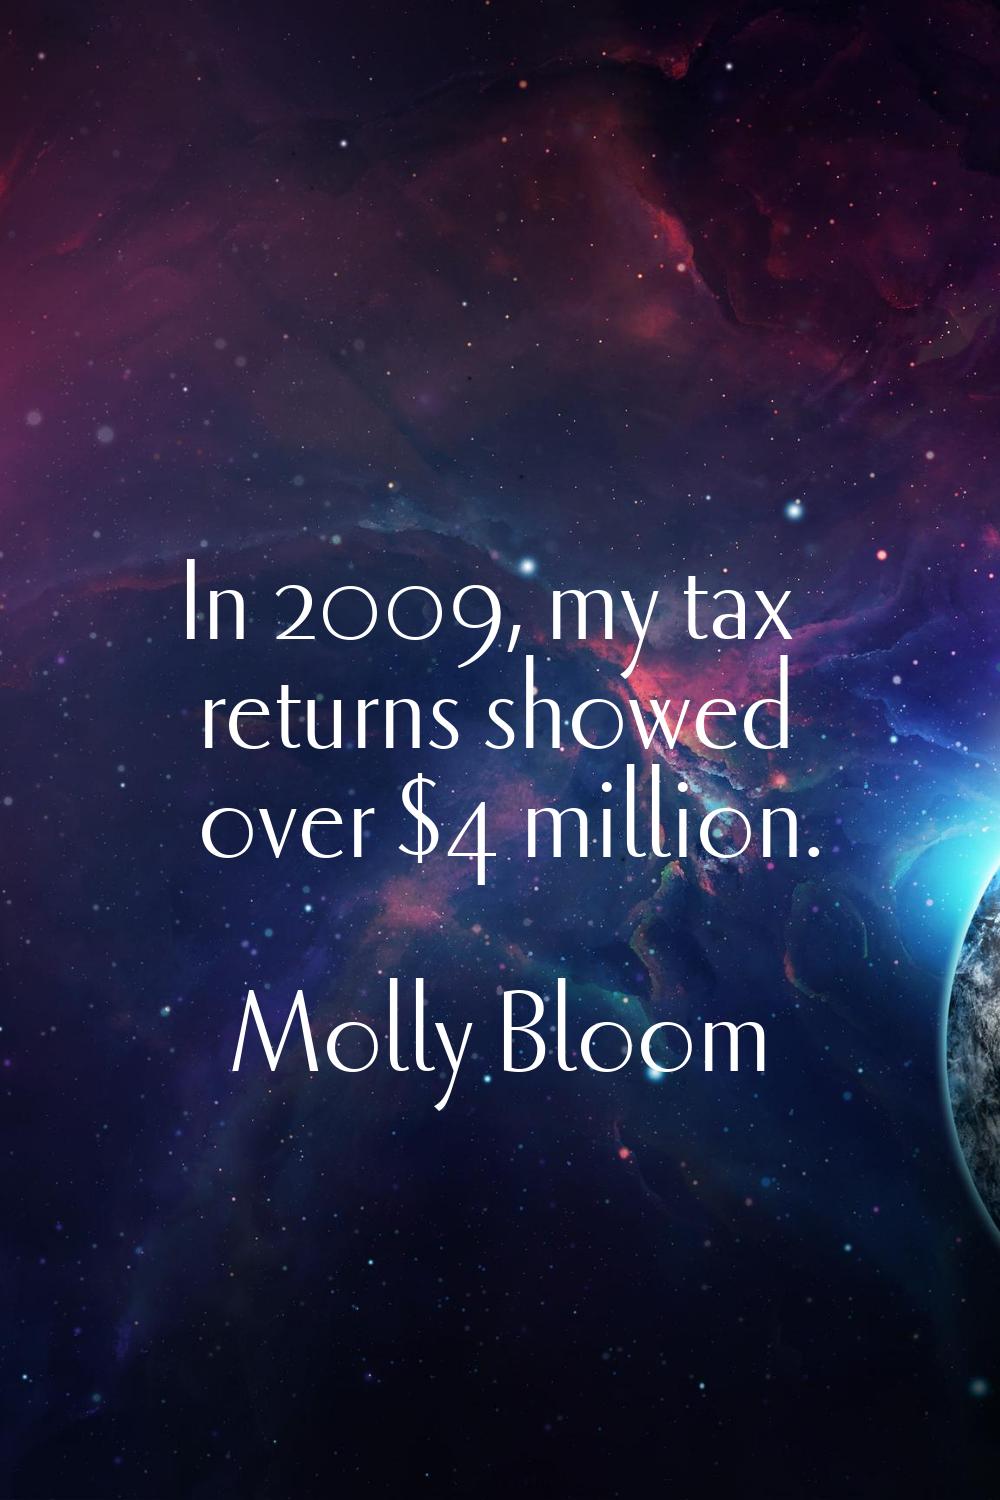 In 2009, my tax returns showed over $4 million.